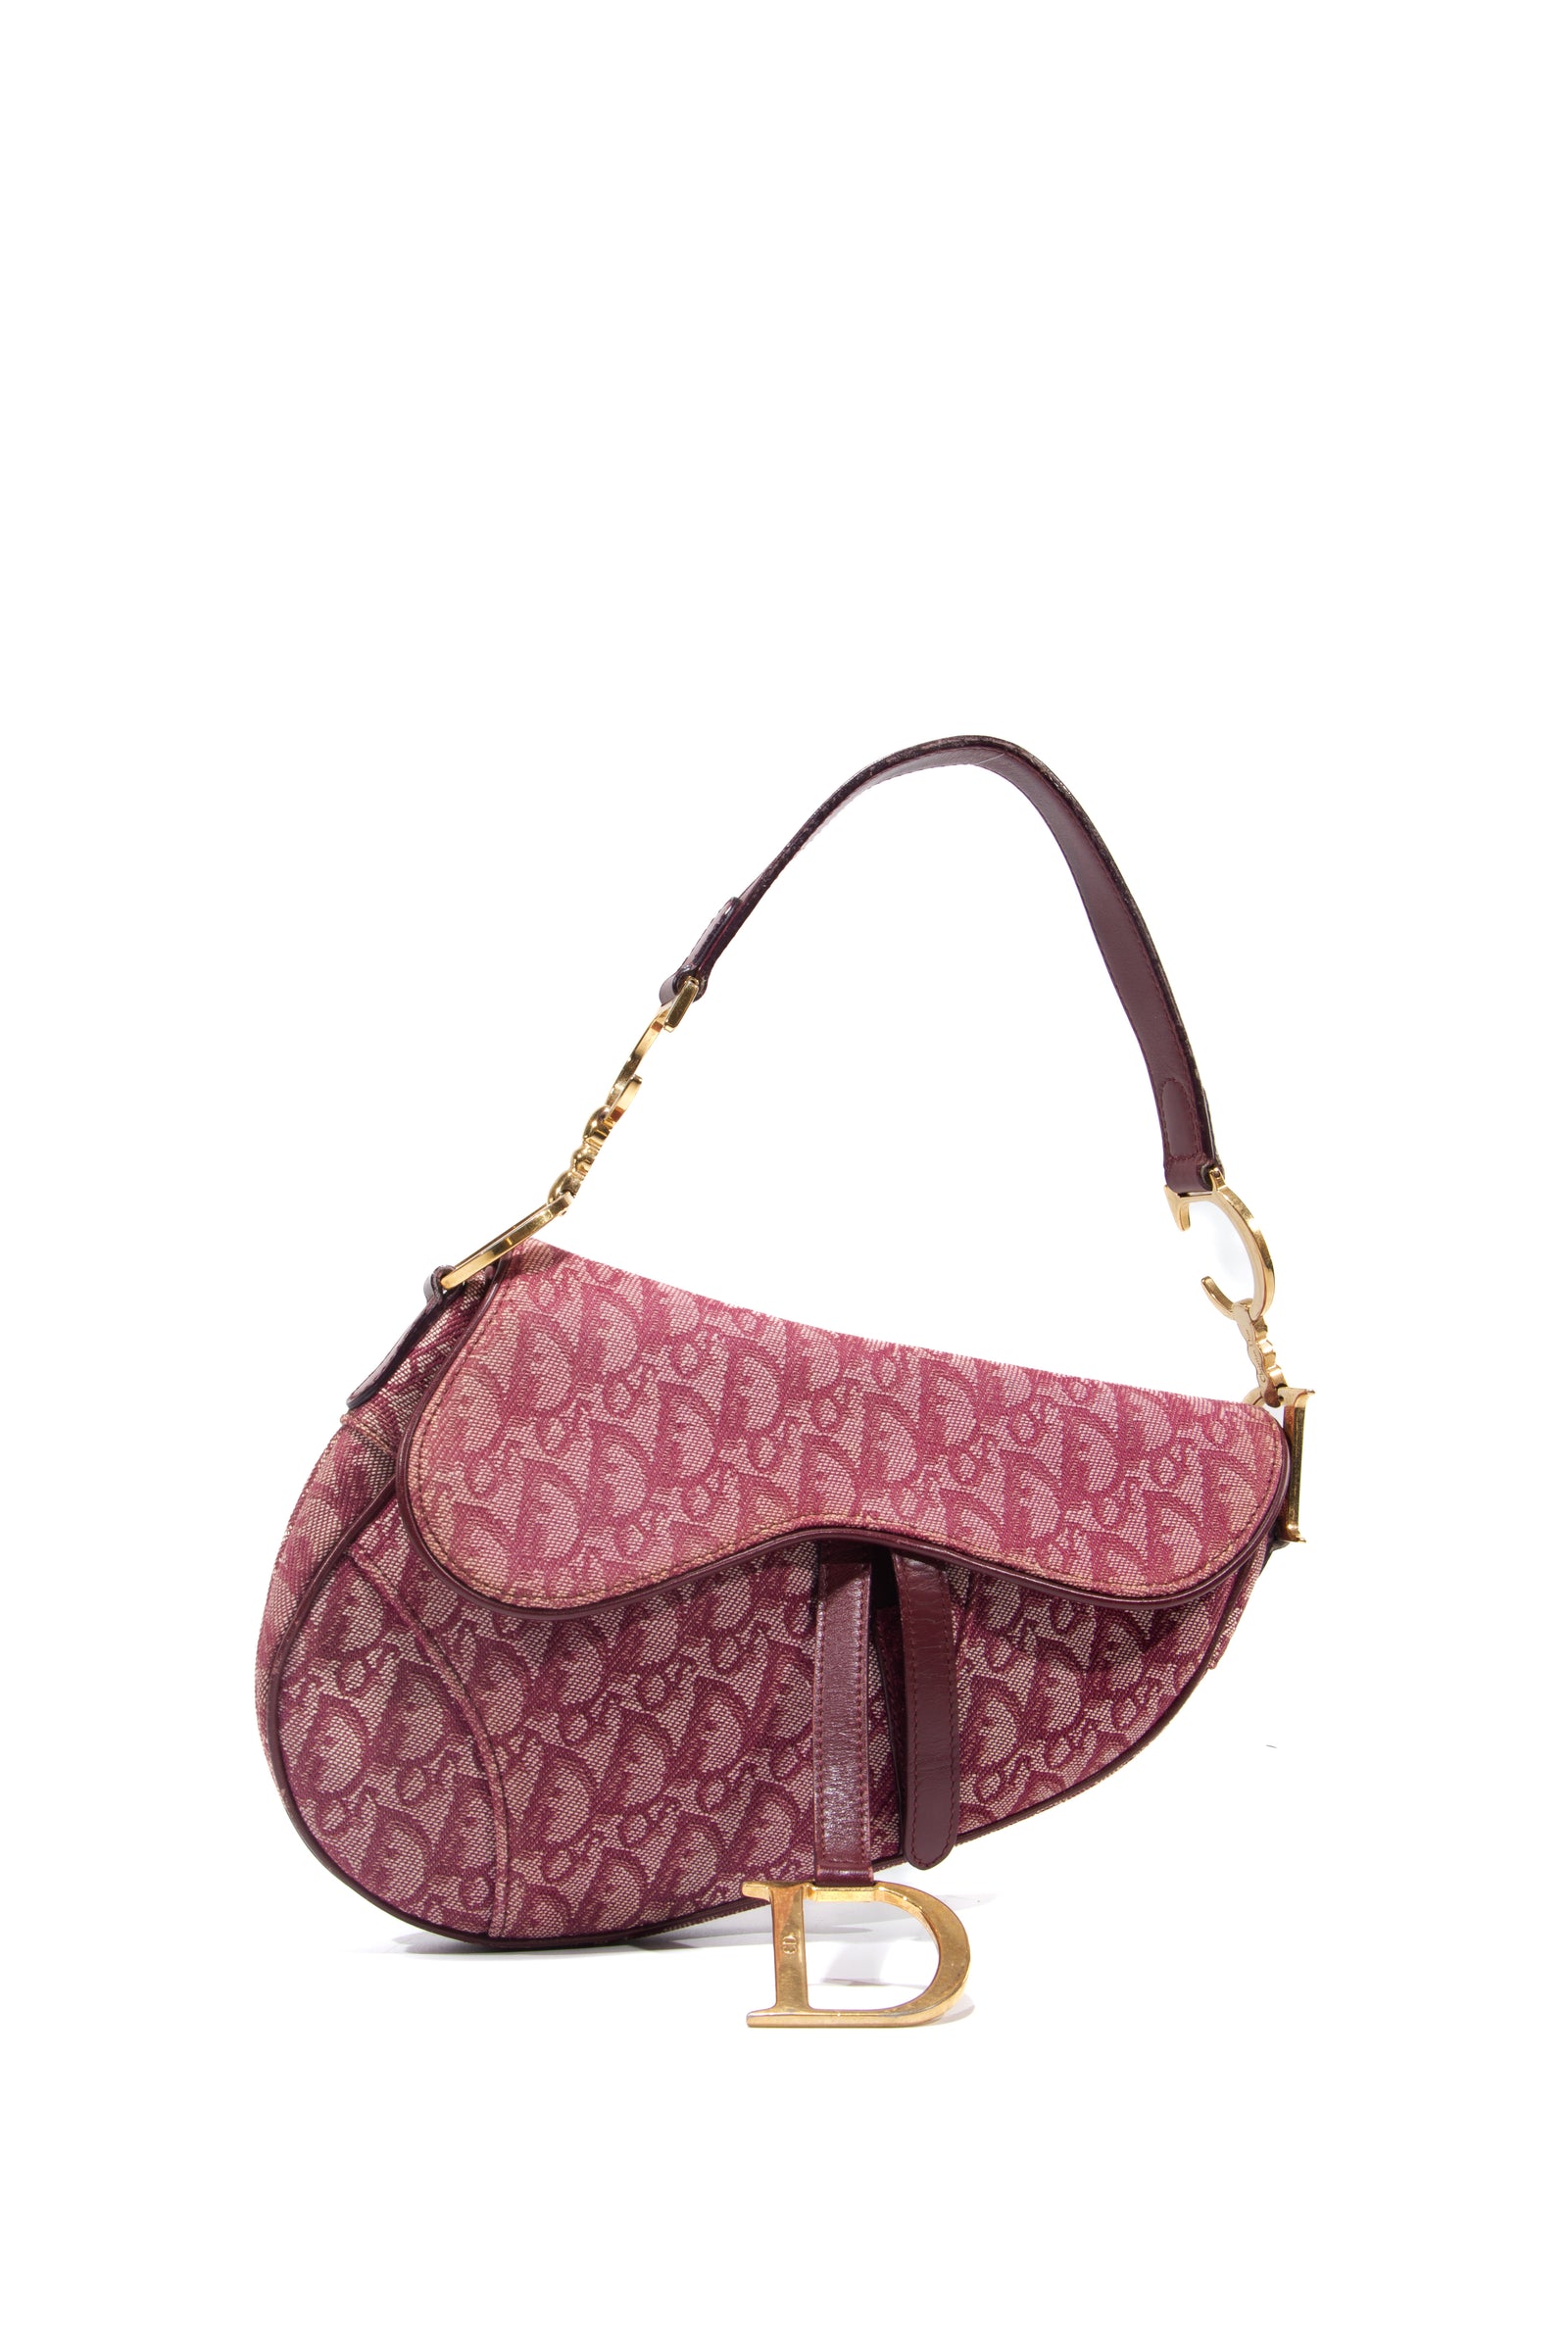 Dior - Authenticated Saddle Vintage Classic Handbag - Cloth Pink for Women, Very Good Condition